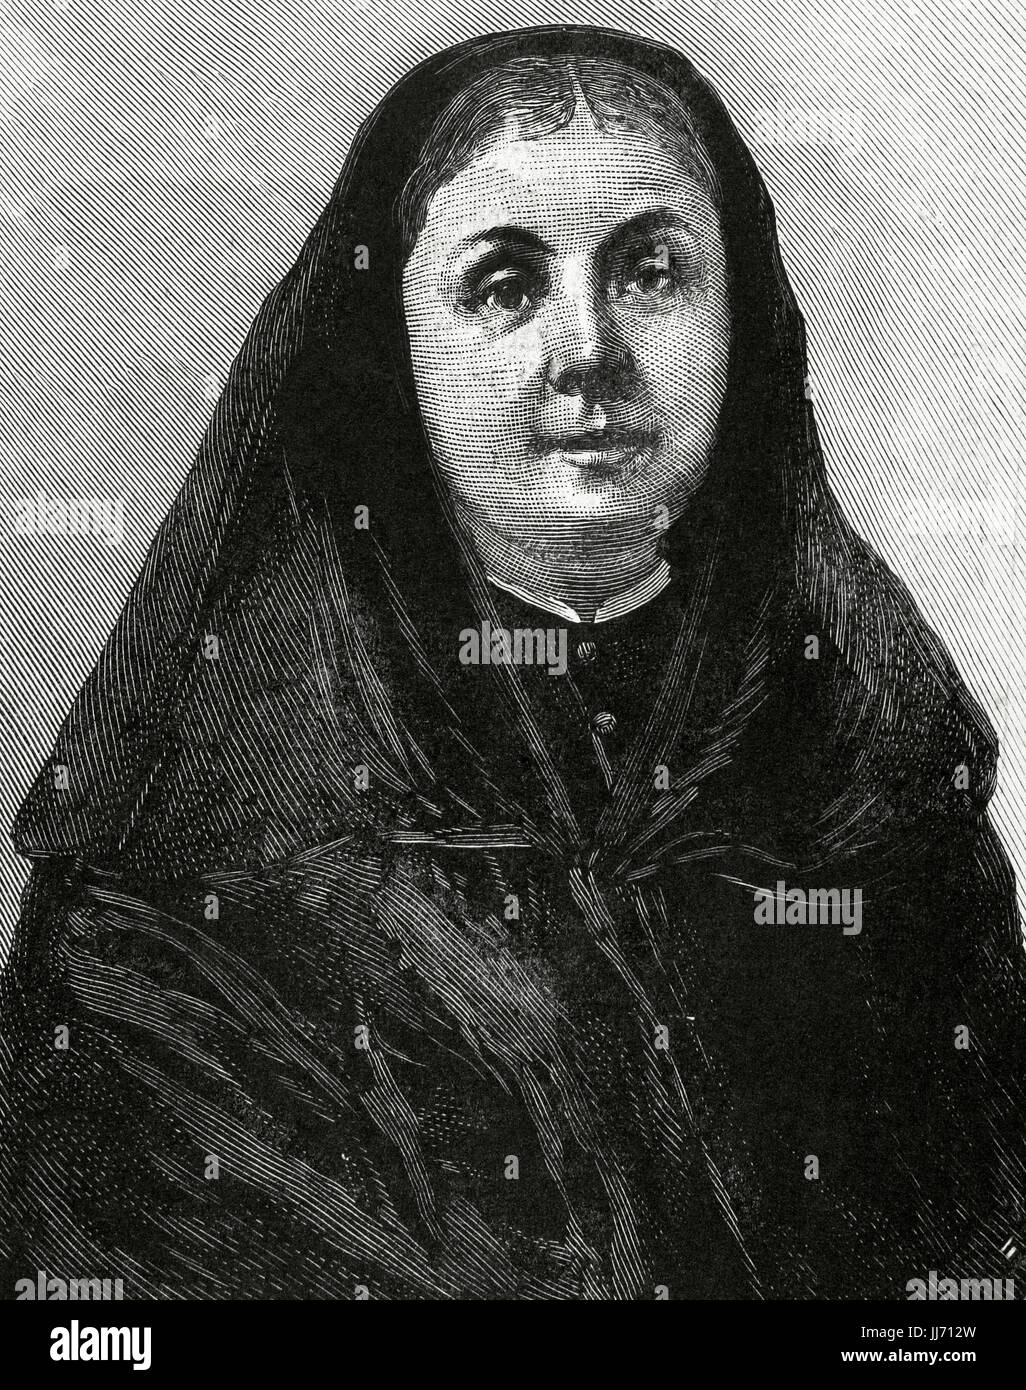 Ernestina Manuel de Villena (1830-1889). Benefactor and introducer in Spain of The Brothers of the Christian Schools. Engraving by Arturo Carretero (1852-1903). The Spanish and American Illustration, 1886. Stock Photo